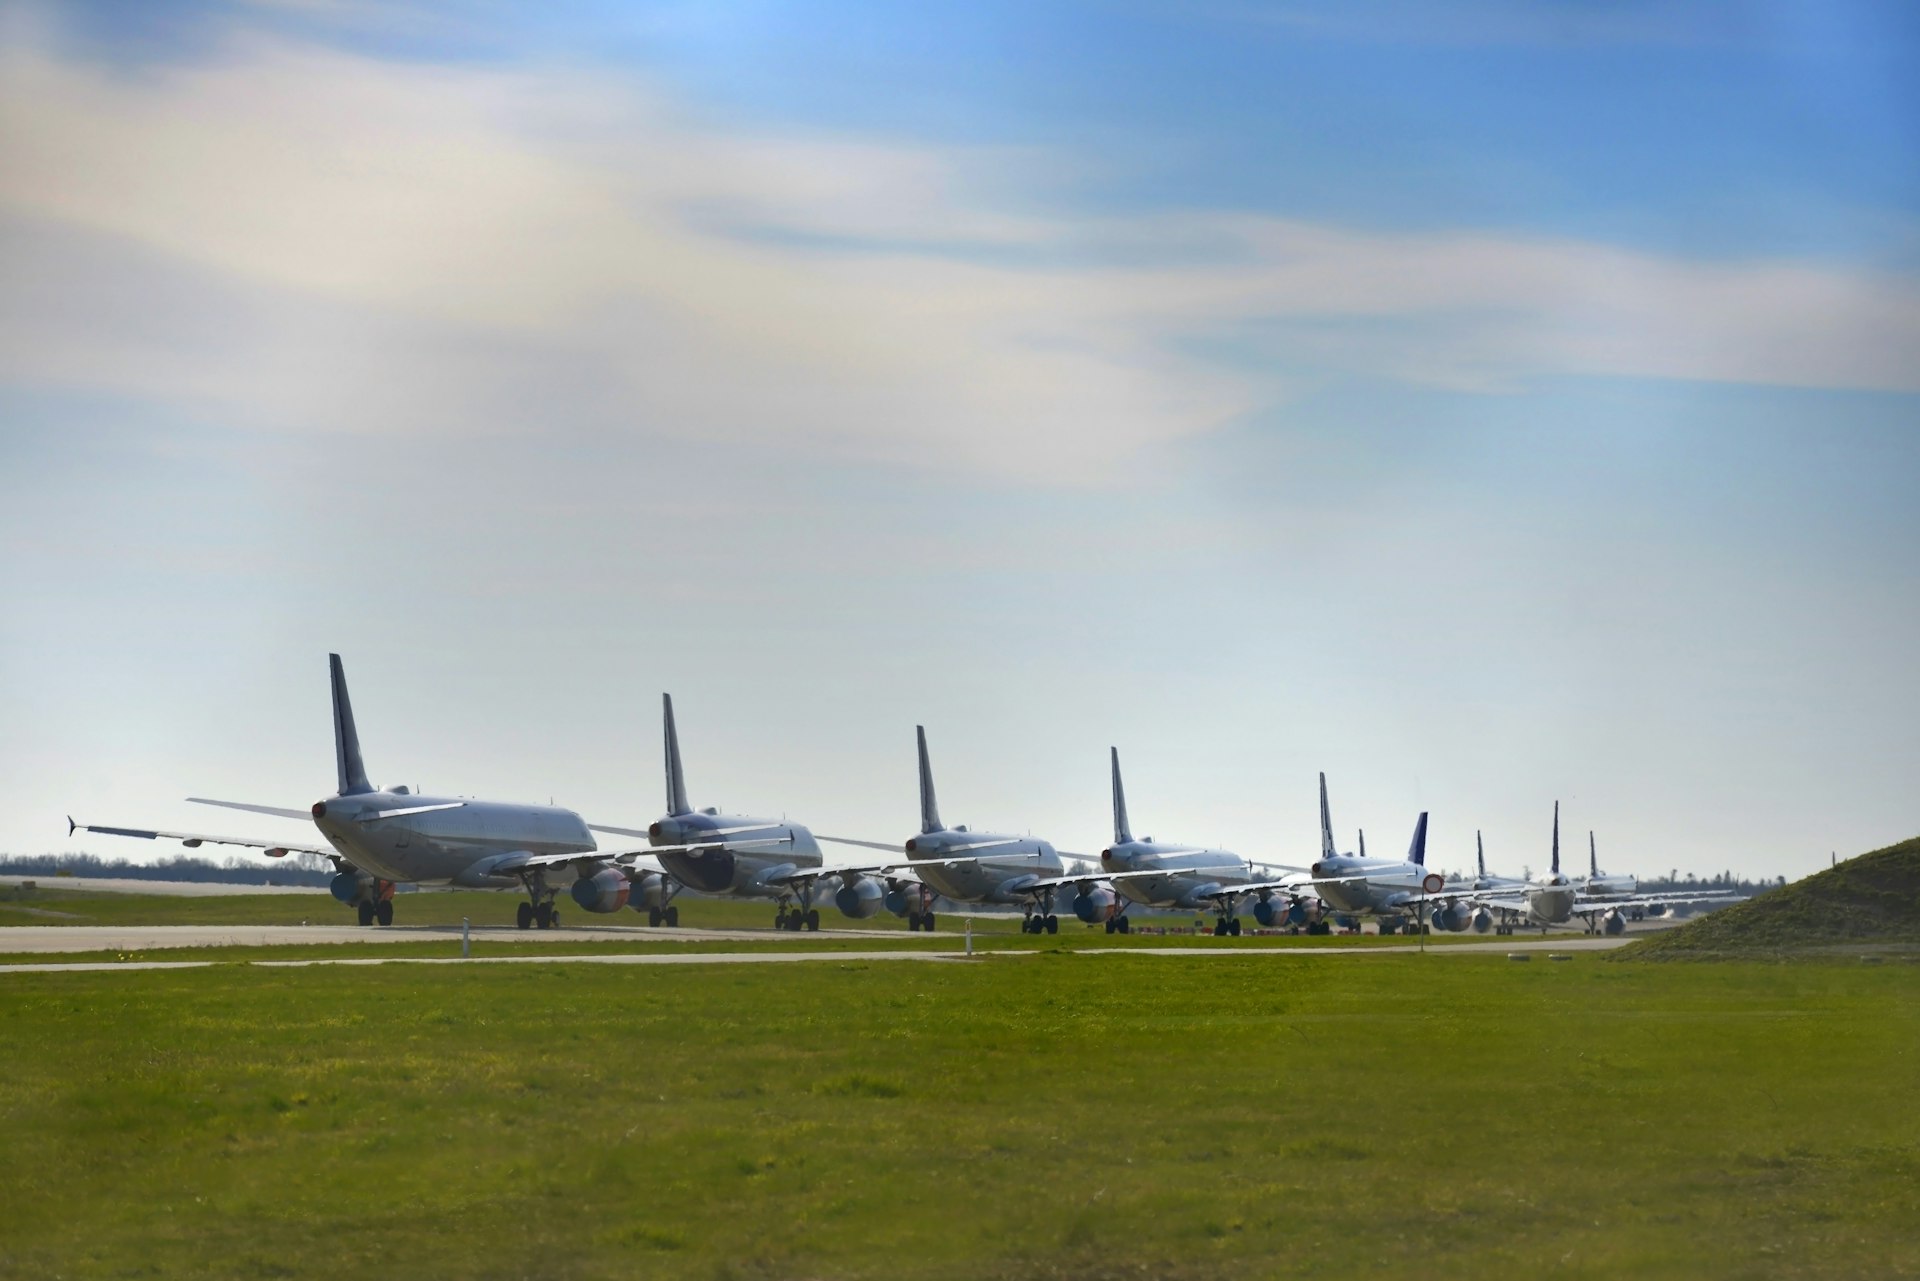 A line of aircraft parked at an airport